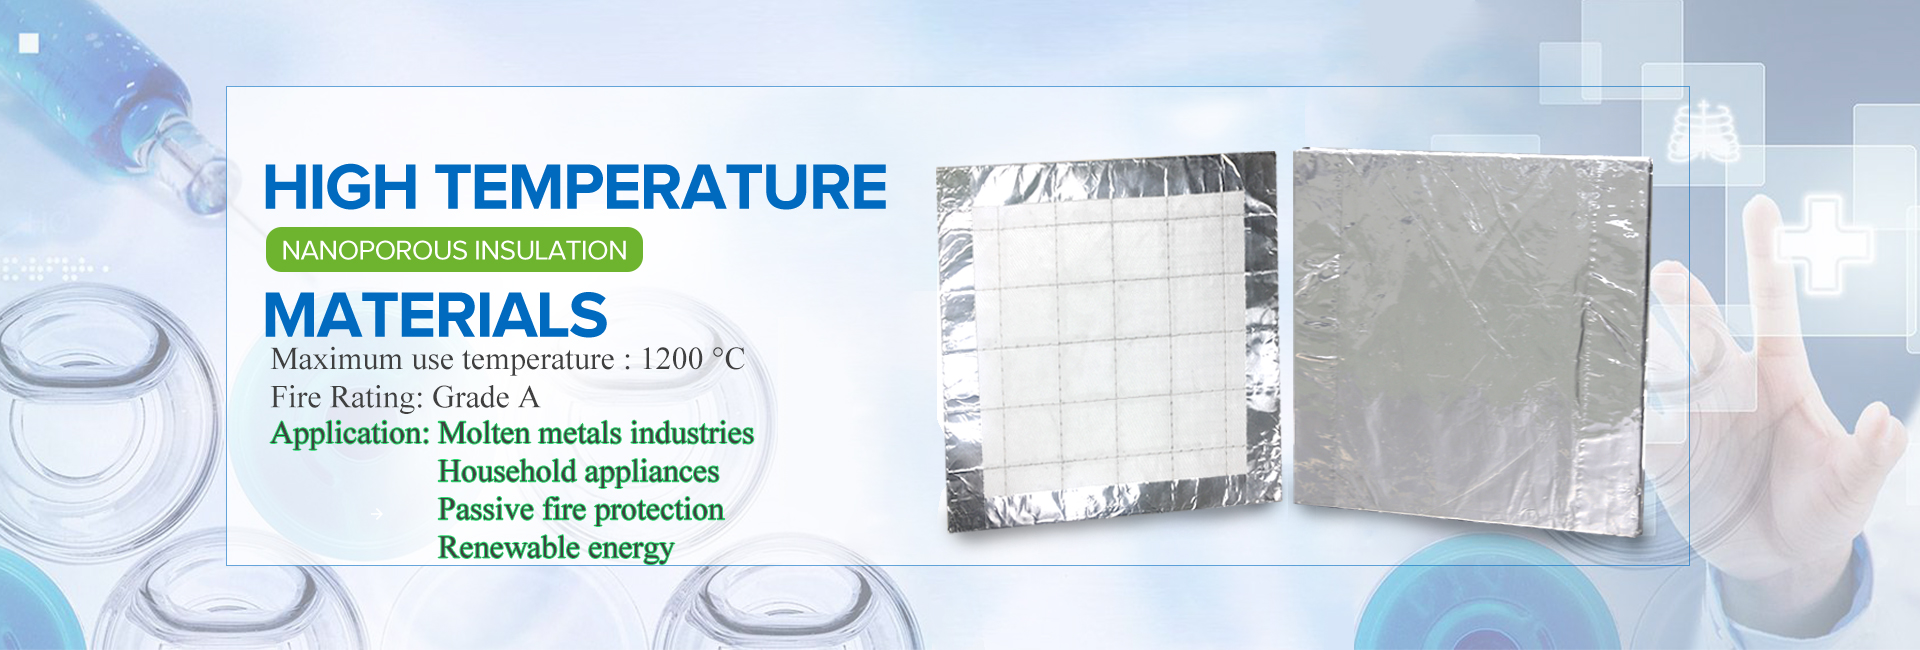 https://www.zerothermovid.com/high-temperature-nano-microporous-slotted-shaped-insulation-panels-product/